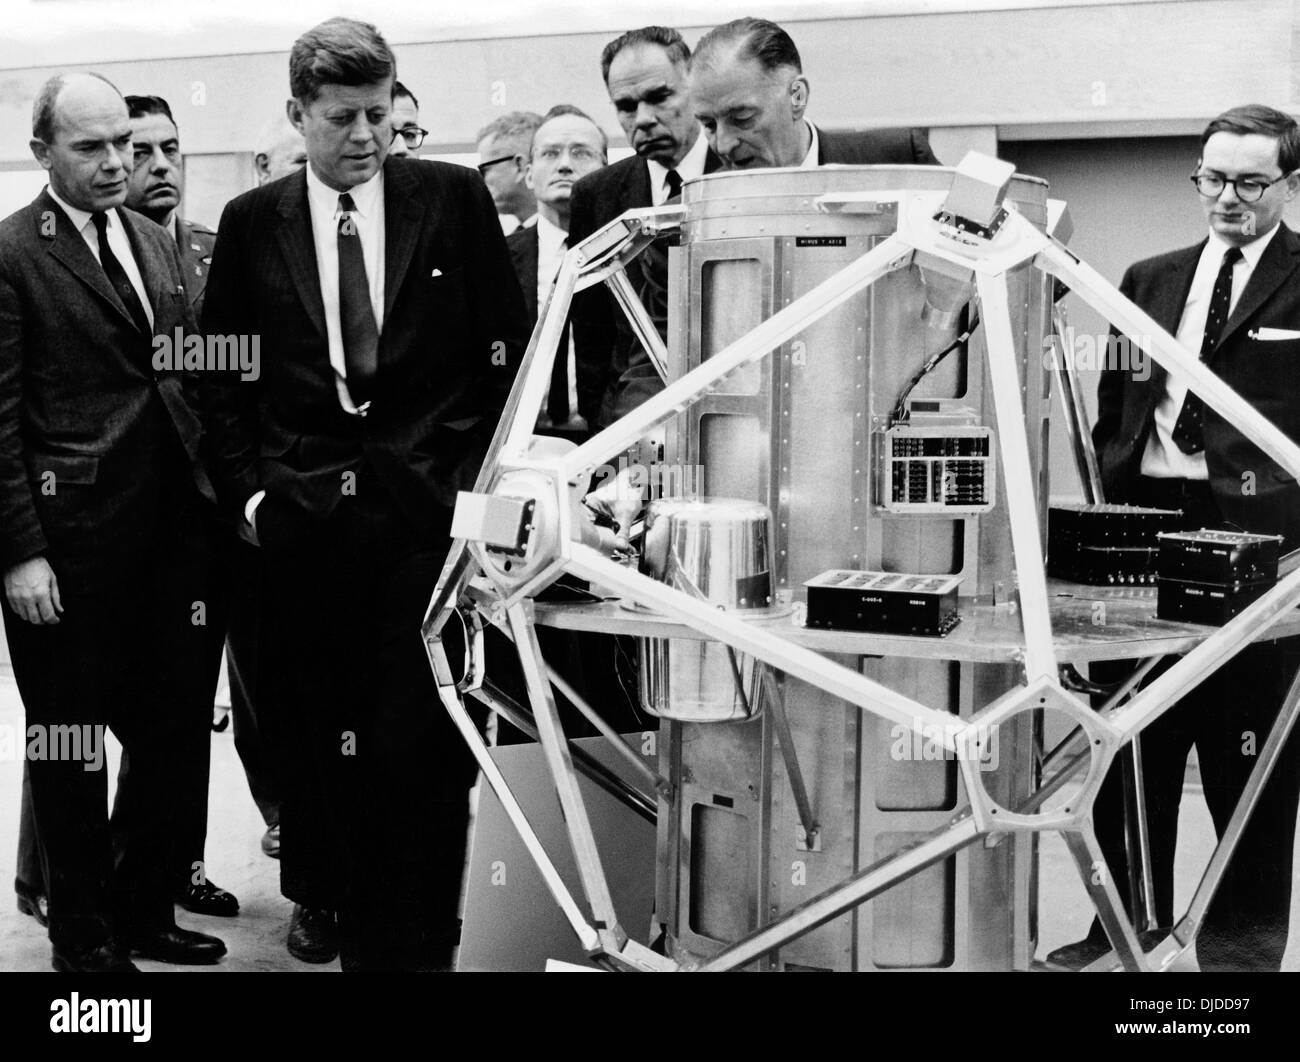 US President John Kennedy inspects the VELA satellite designed for the detection of atmospheric nuclear testing during a visit to Sandia National Labs December 7, 1962 in Albuquerque, NM. Visible behind the satellite are national security advisor McGeorge Bundy, Atomic Energy Commission chairman Glenn Seaborg, and Sandia President Sigmund Schwartz. Stock Photo